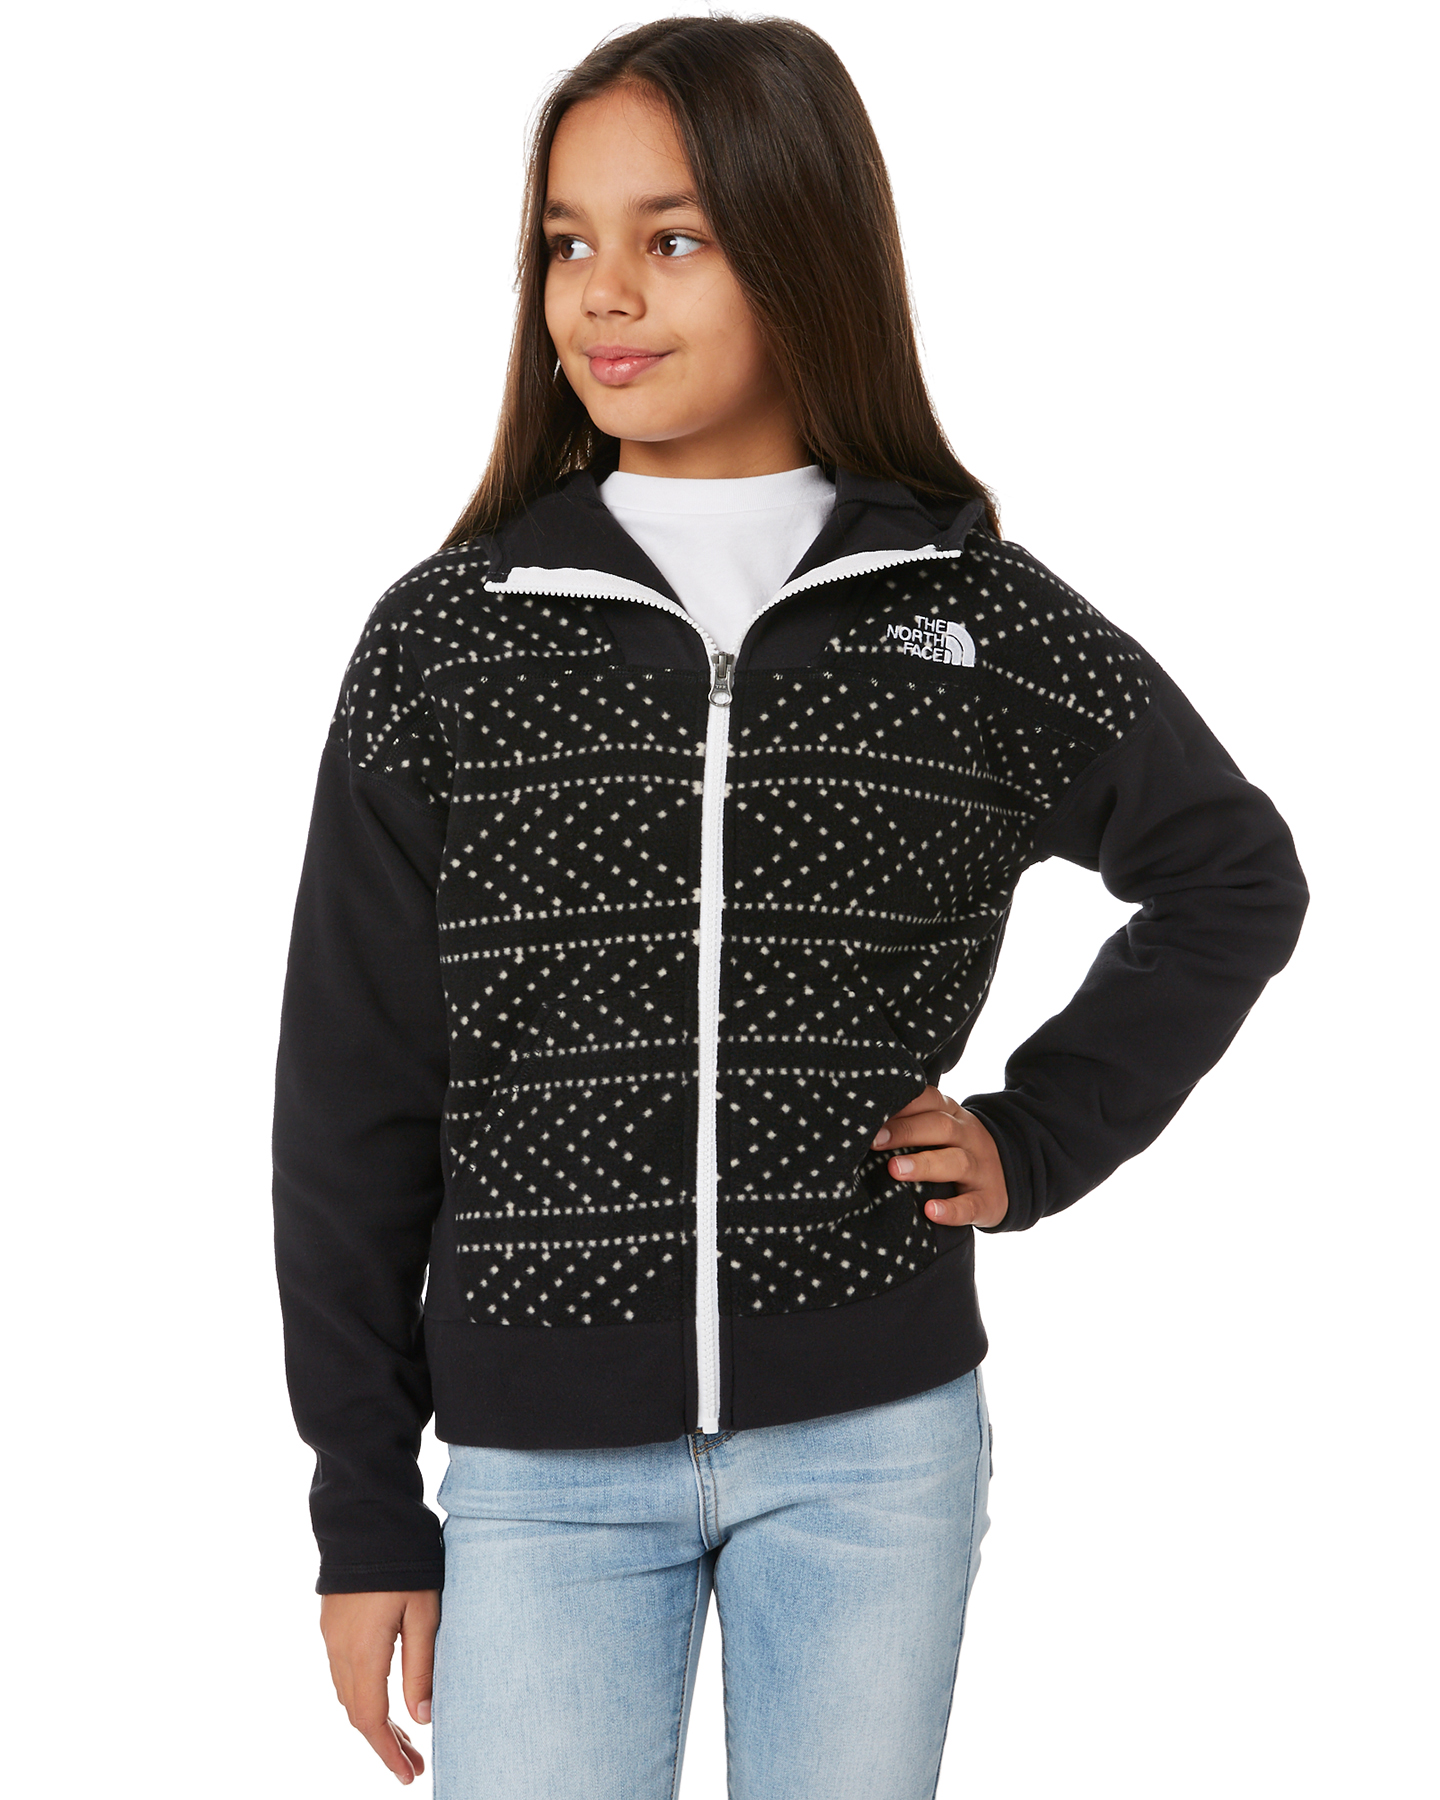 north face outlet kids